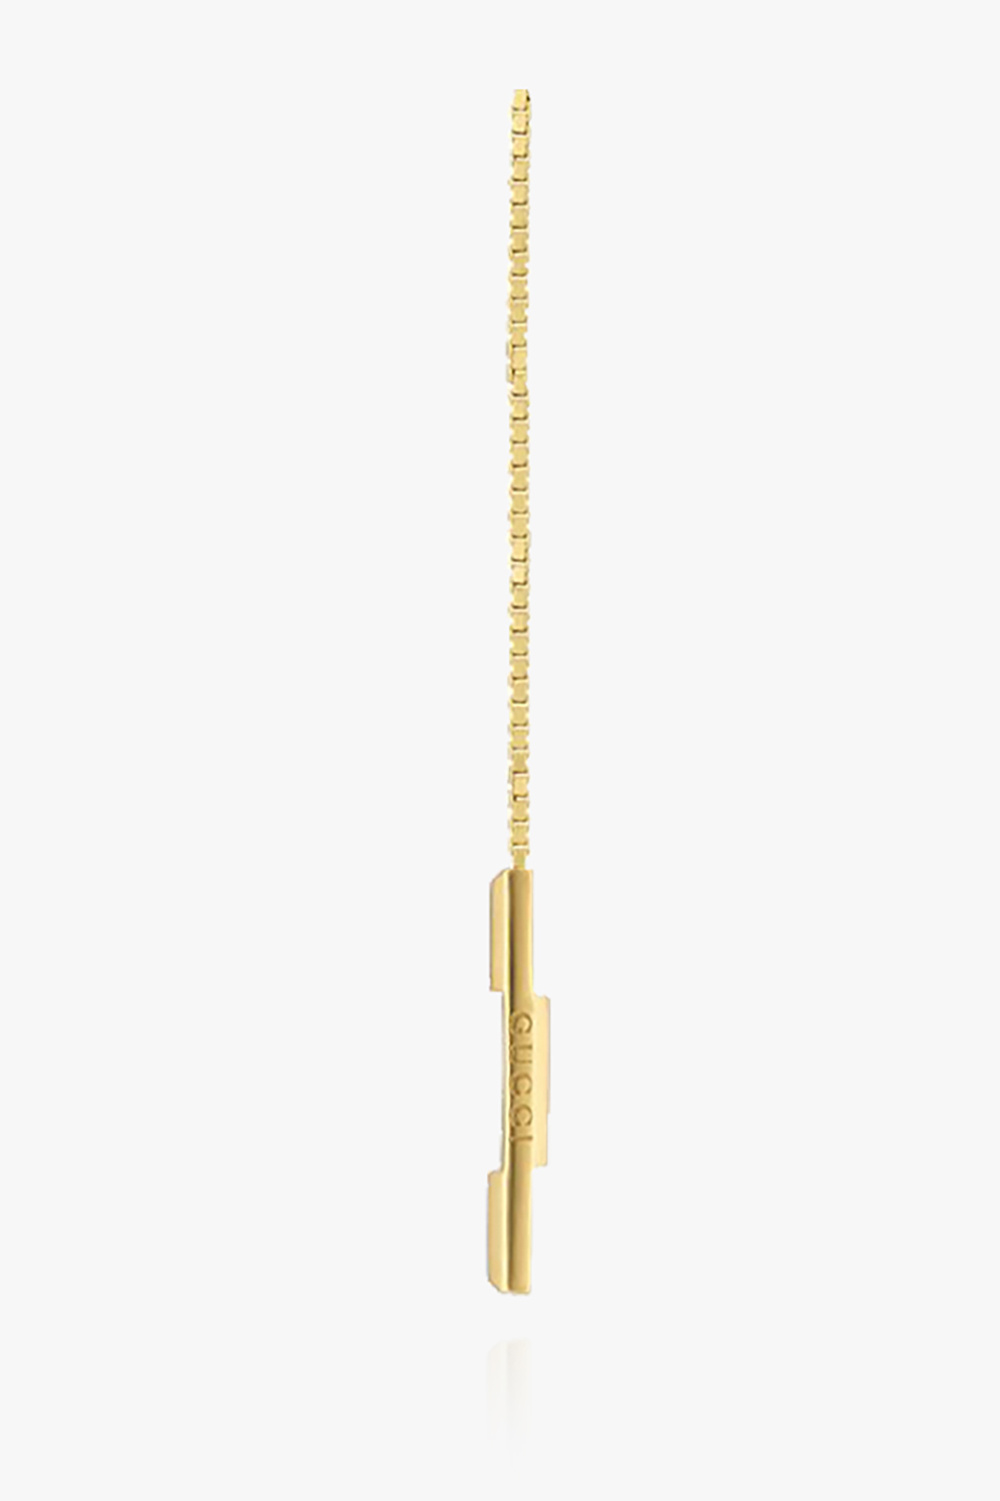 gucci sustainable Gold earrings